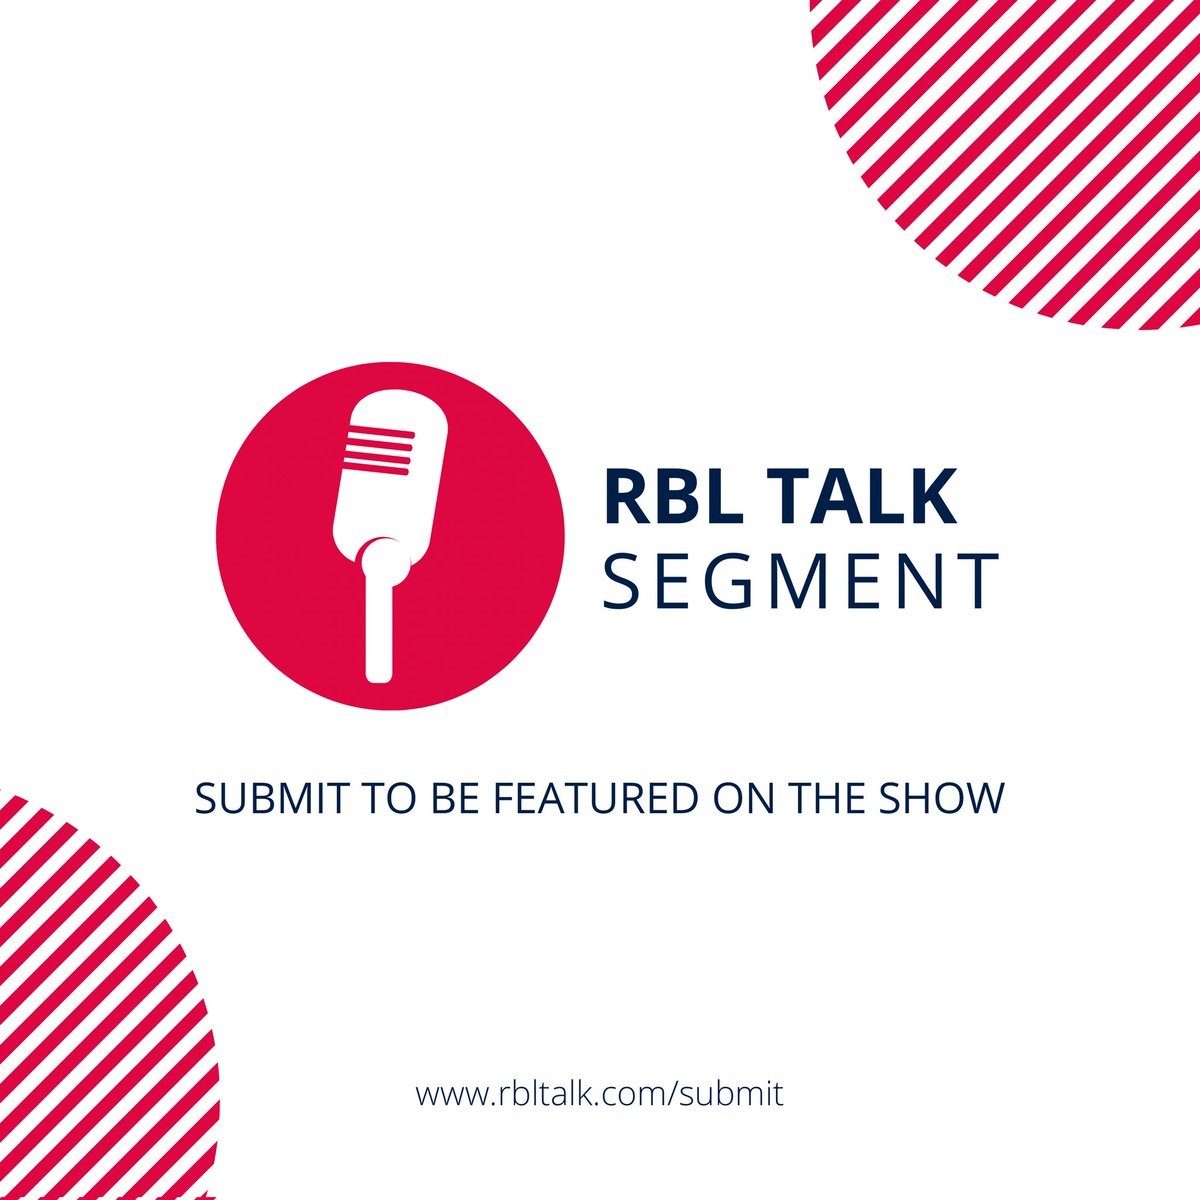 🗨️ What did you think of this weeks game?

🗣️ Have a question for the host?

📥 Submit to the show on this post or at the podcast homepage.

🎙️Want to be a guest? Check out rbltalk.com/blog/guest
#WirSindLeipzig #RBL #TSGRBL #Bundesliga